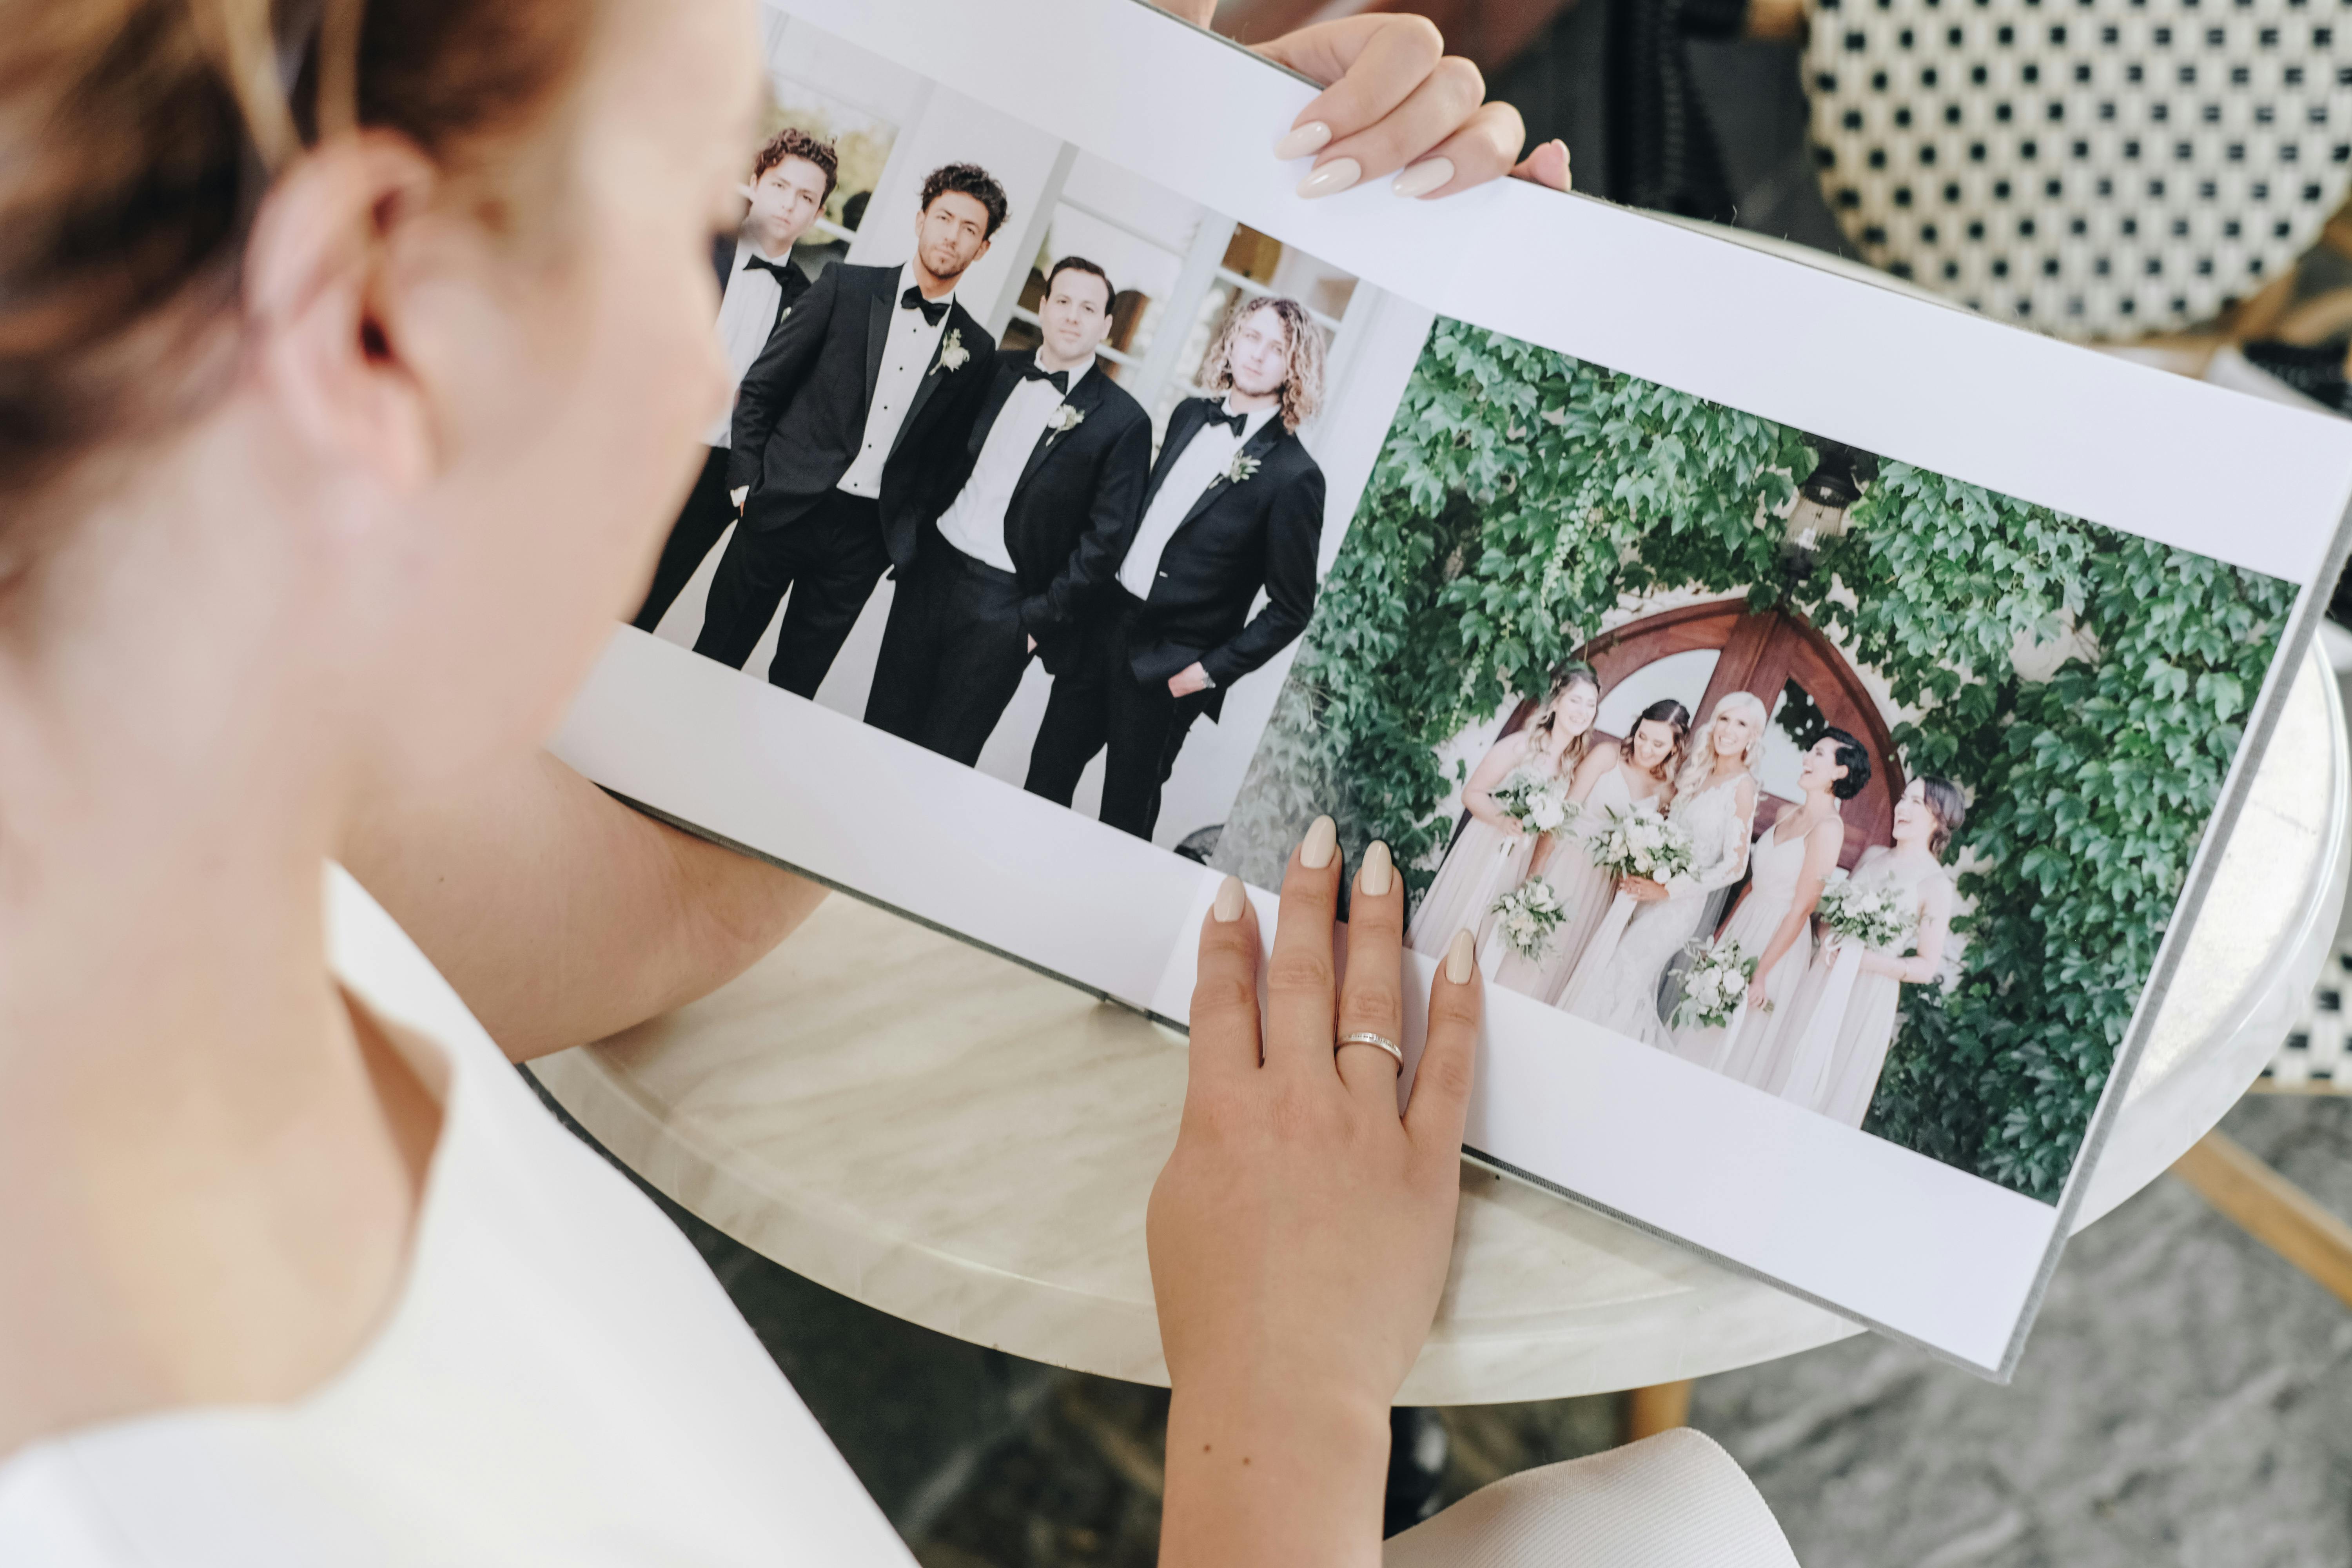 Out top tips for designing the perfect sample wedding album